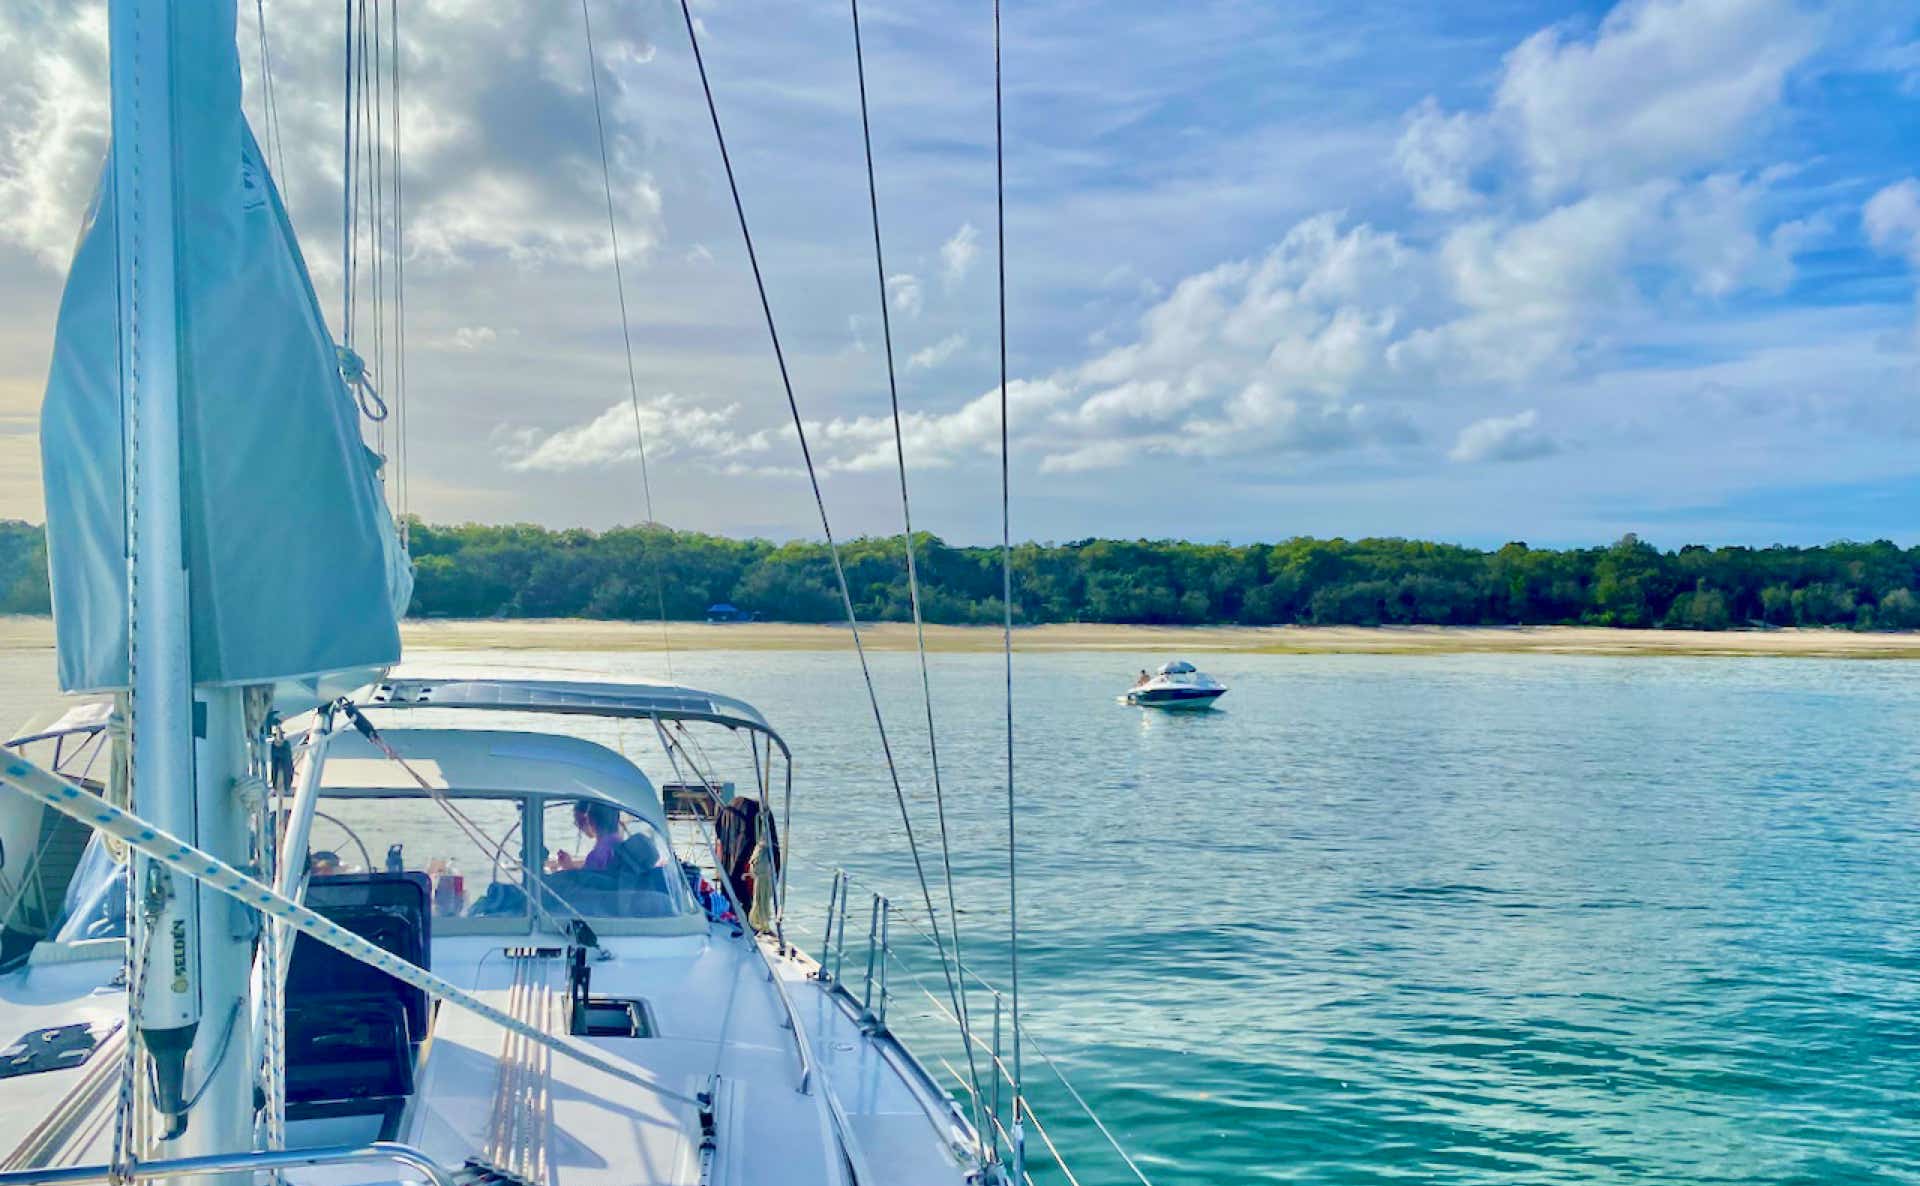 Anchored at Horseshoe Bay, Peel Island, Moreton Bay, Brisbane while on a private yacht charter aboard Curew Escape